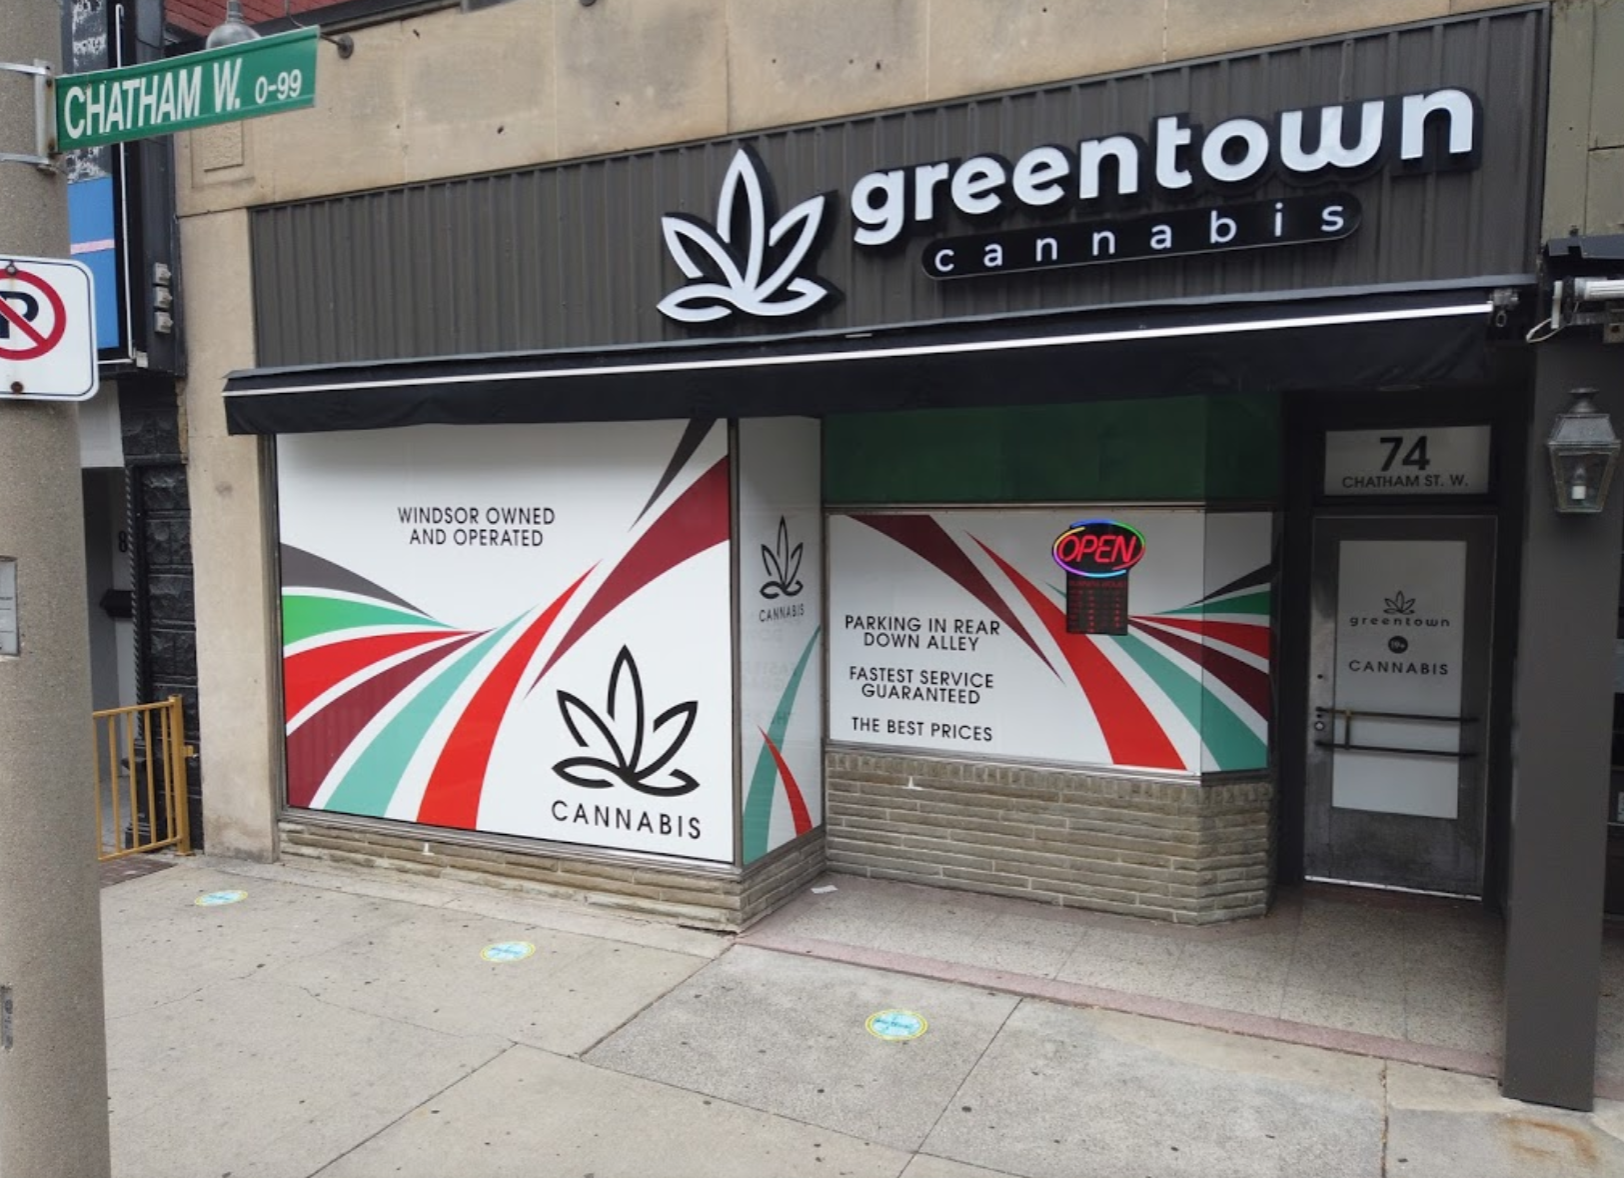 Ontario Cannabis Retail Overview